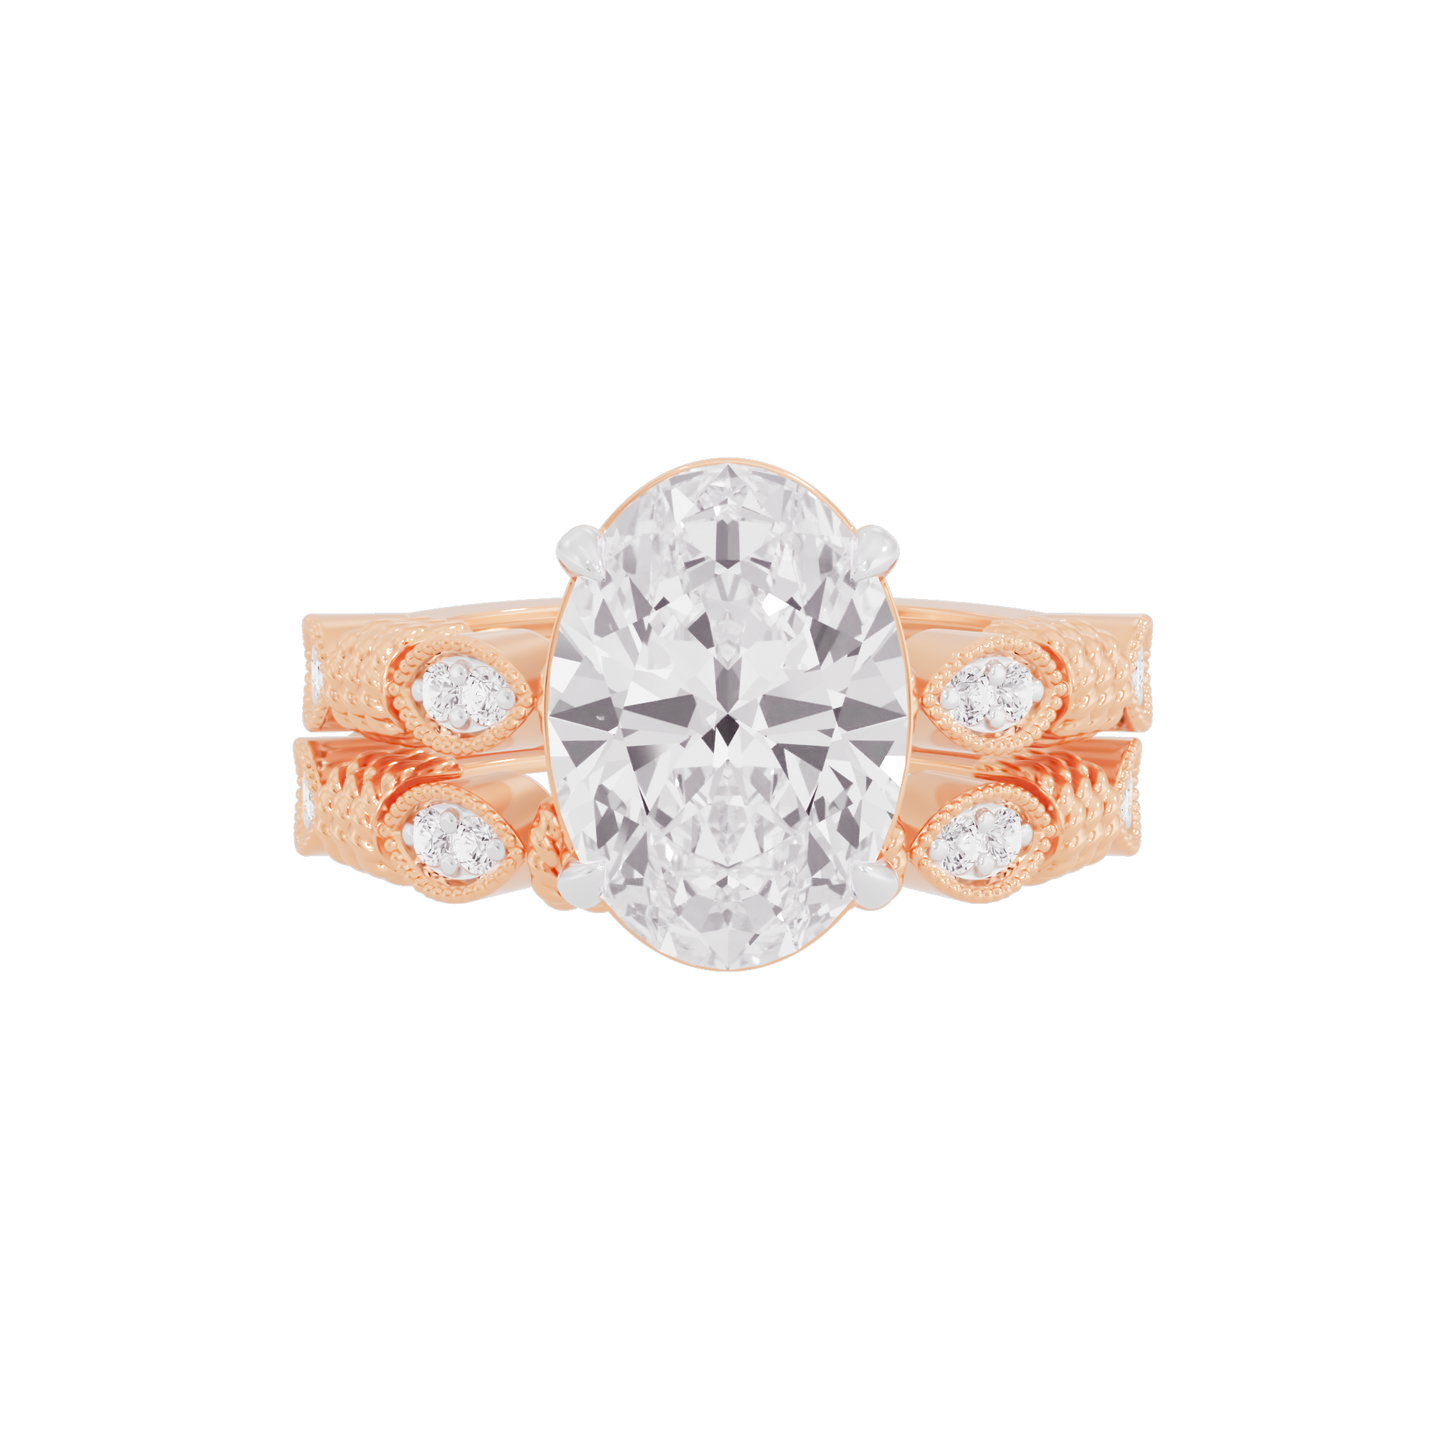 Ethereal Whispers Diamond Ring